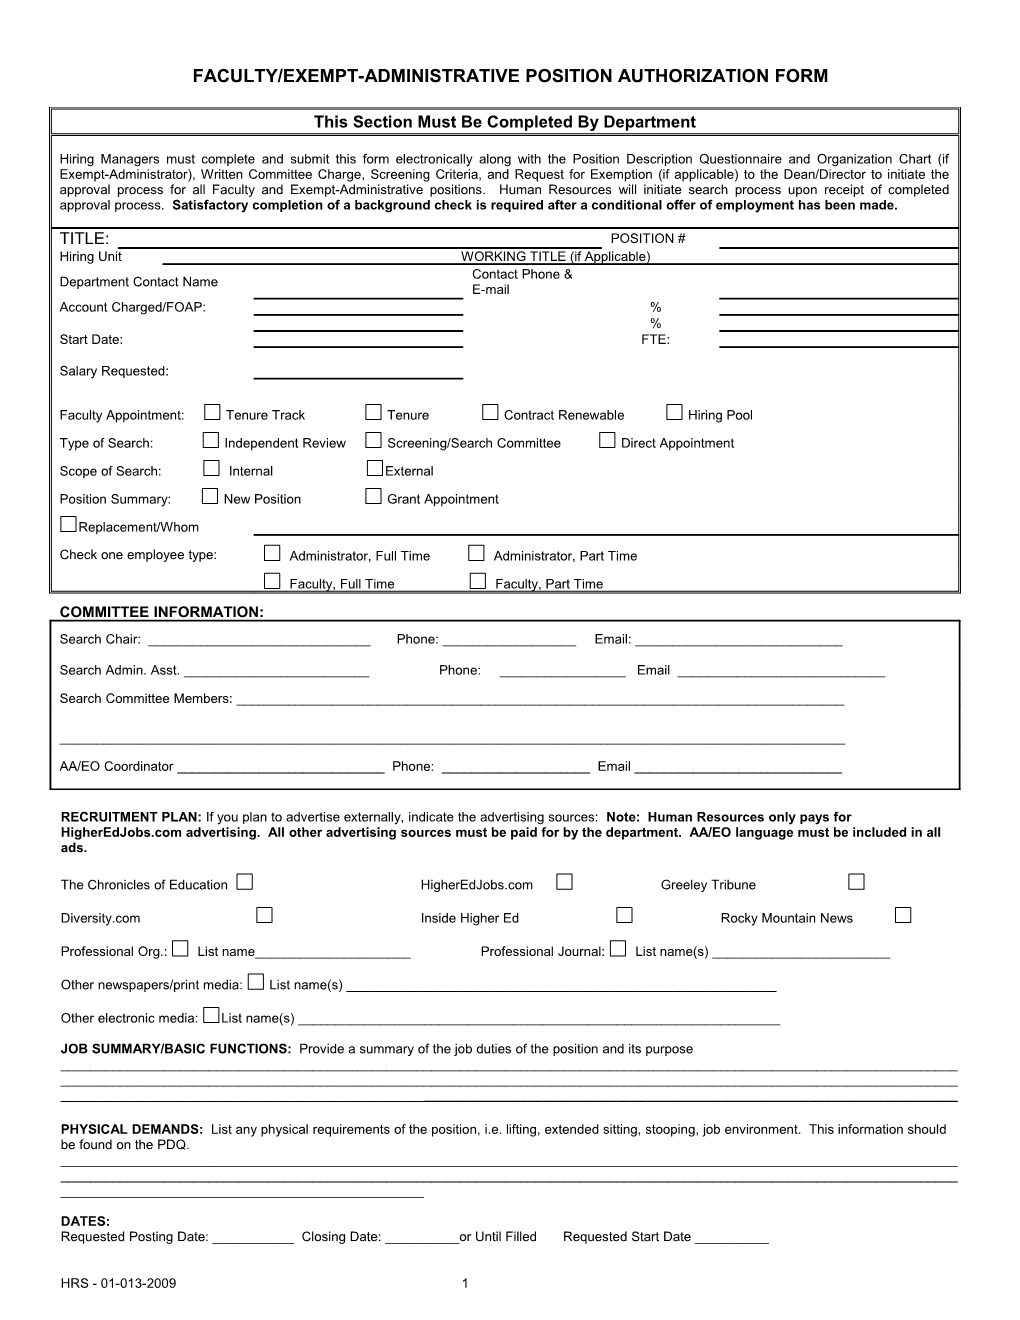 Faculty/Exempt-Administrative Position Authorization Form